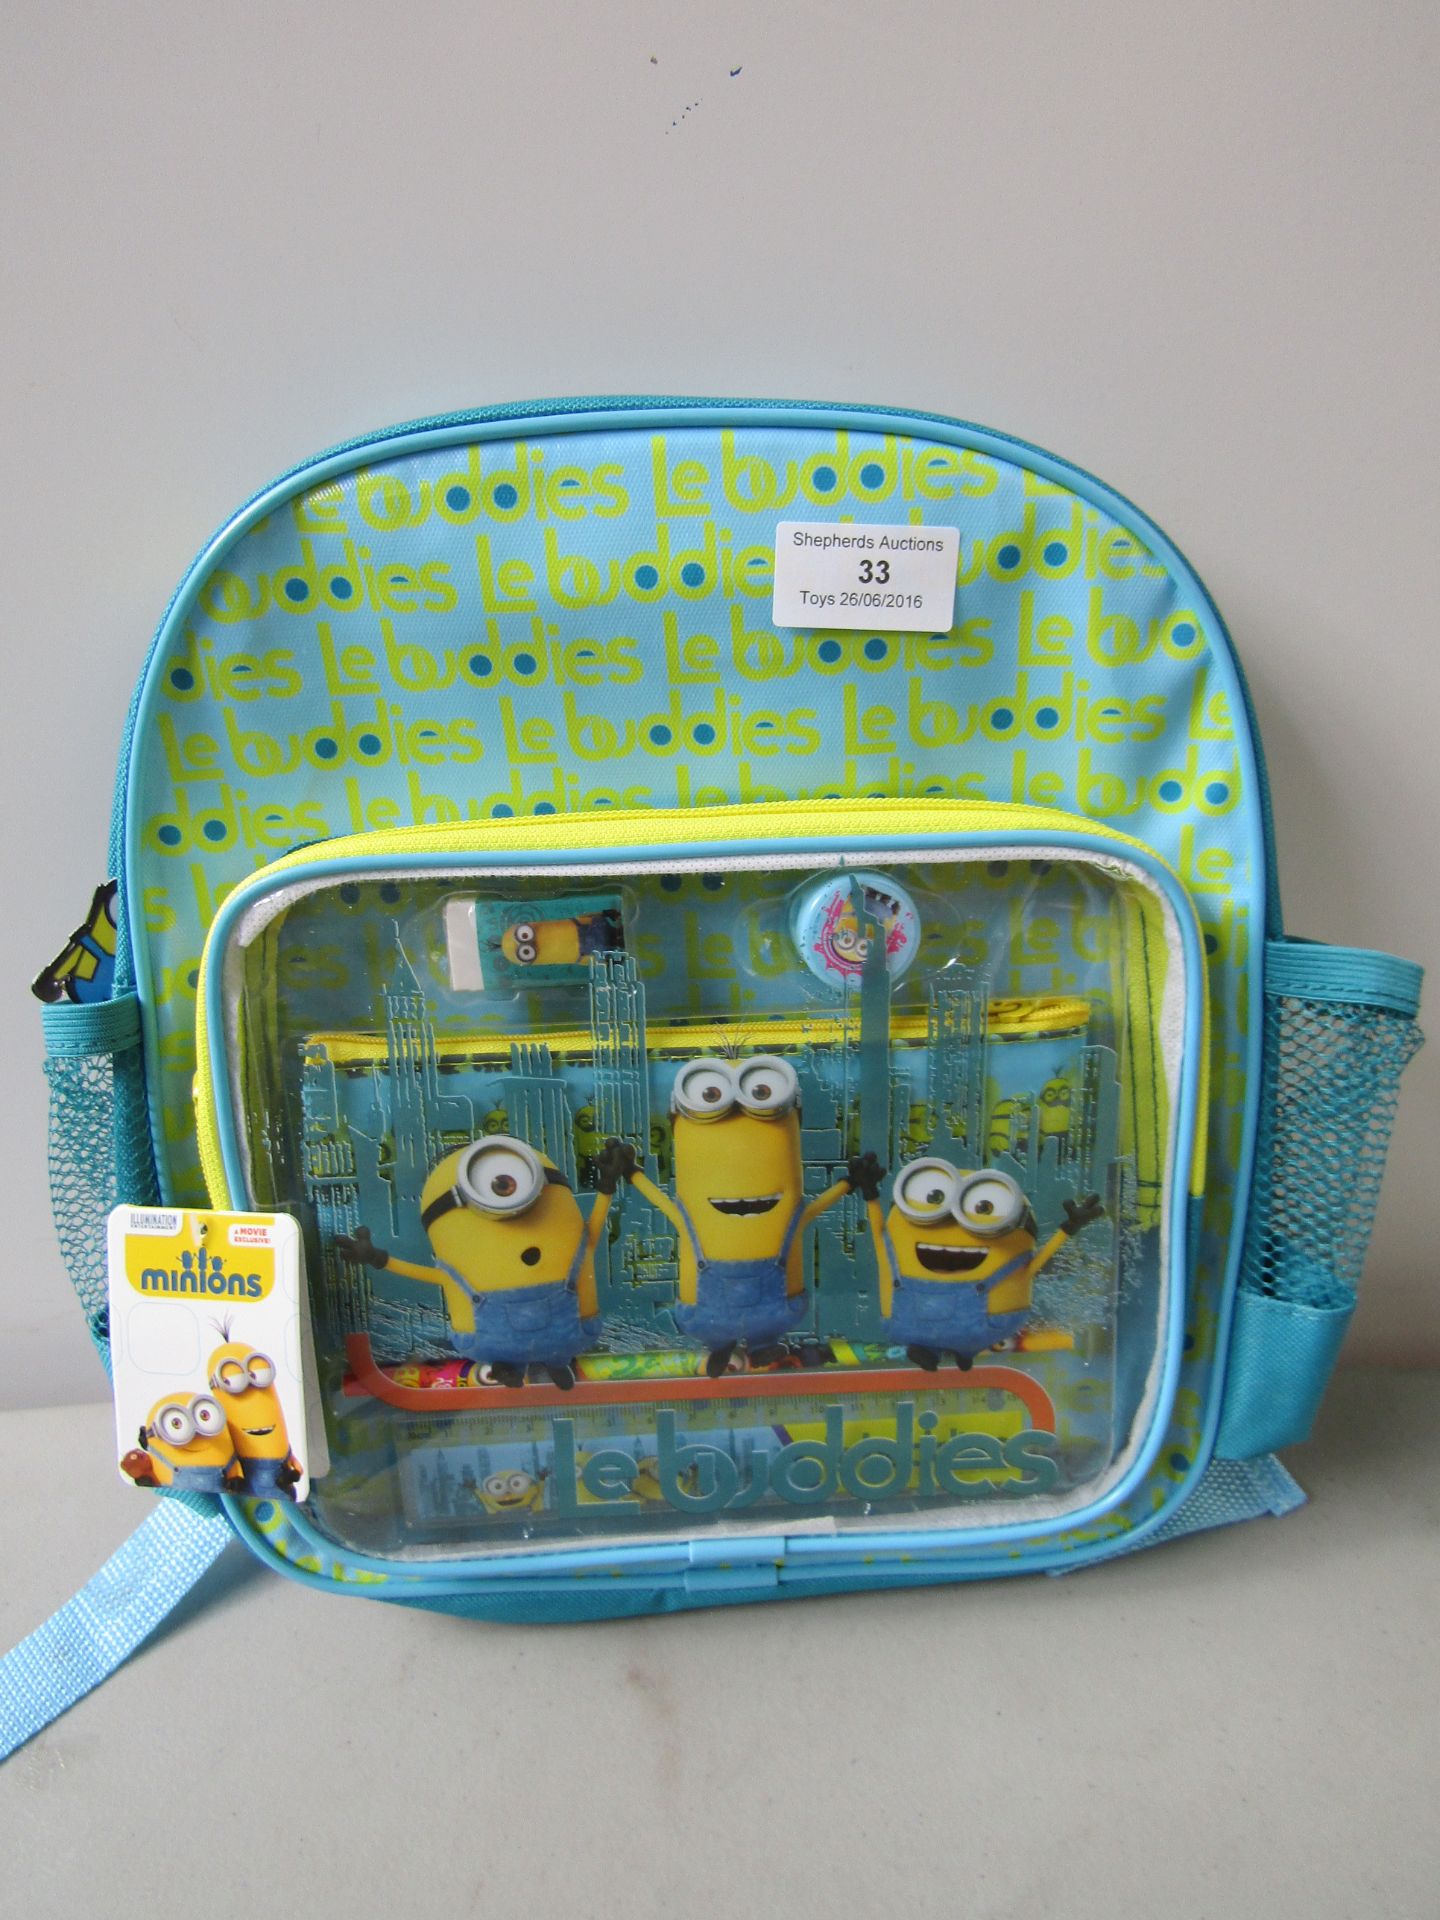 "Le Buddies" Minions Back Pack with Stationary Set.